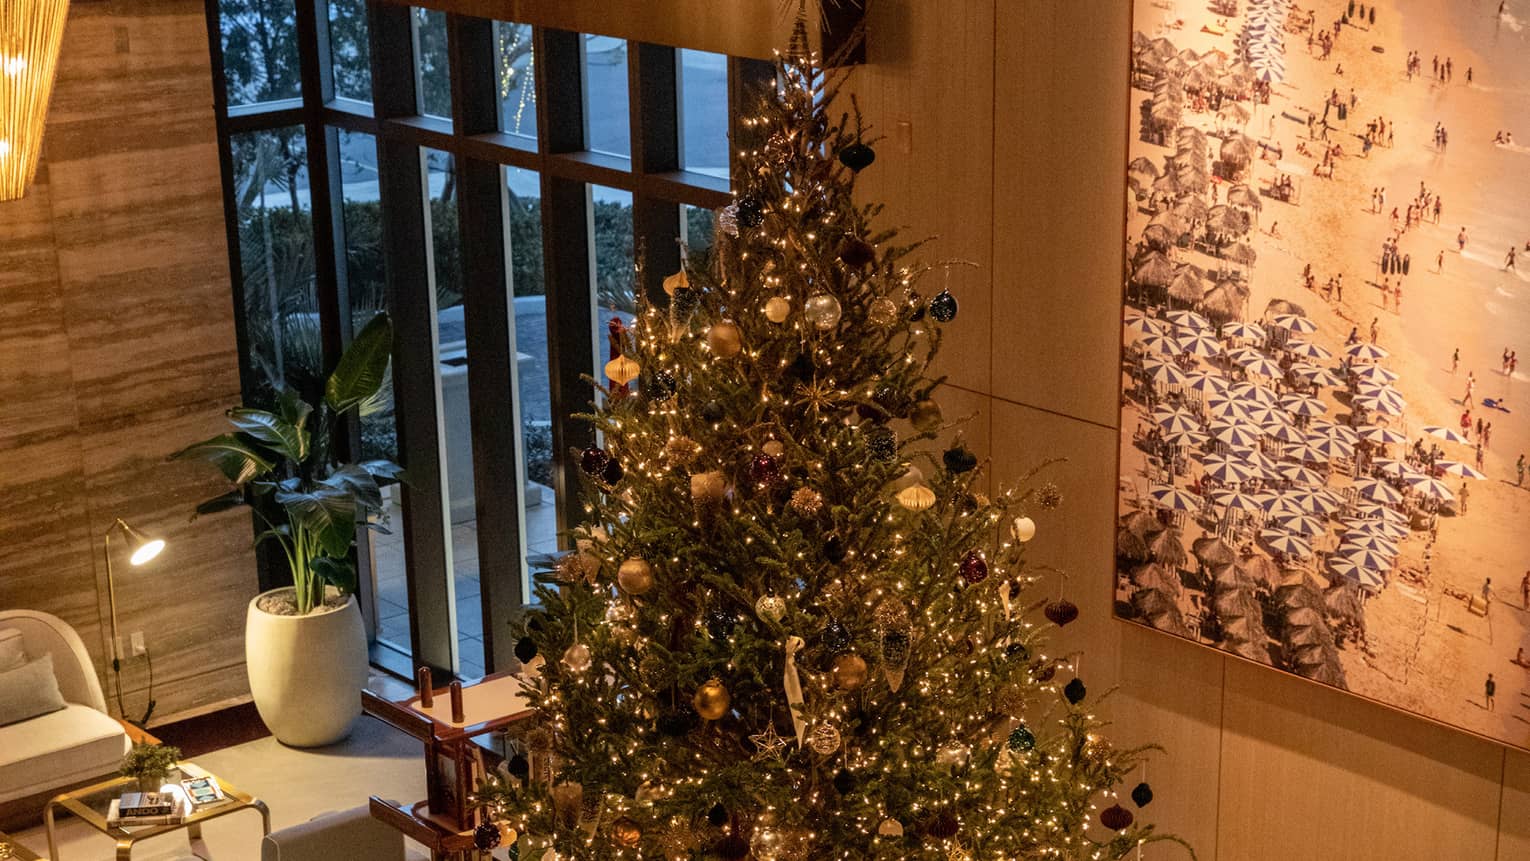 A Christmas tree in the middle of a lobby area.